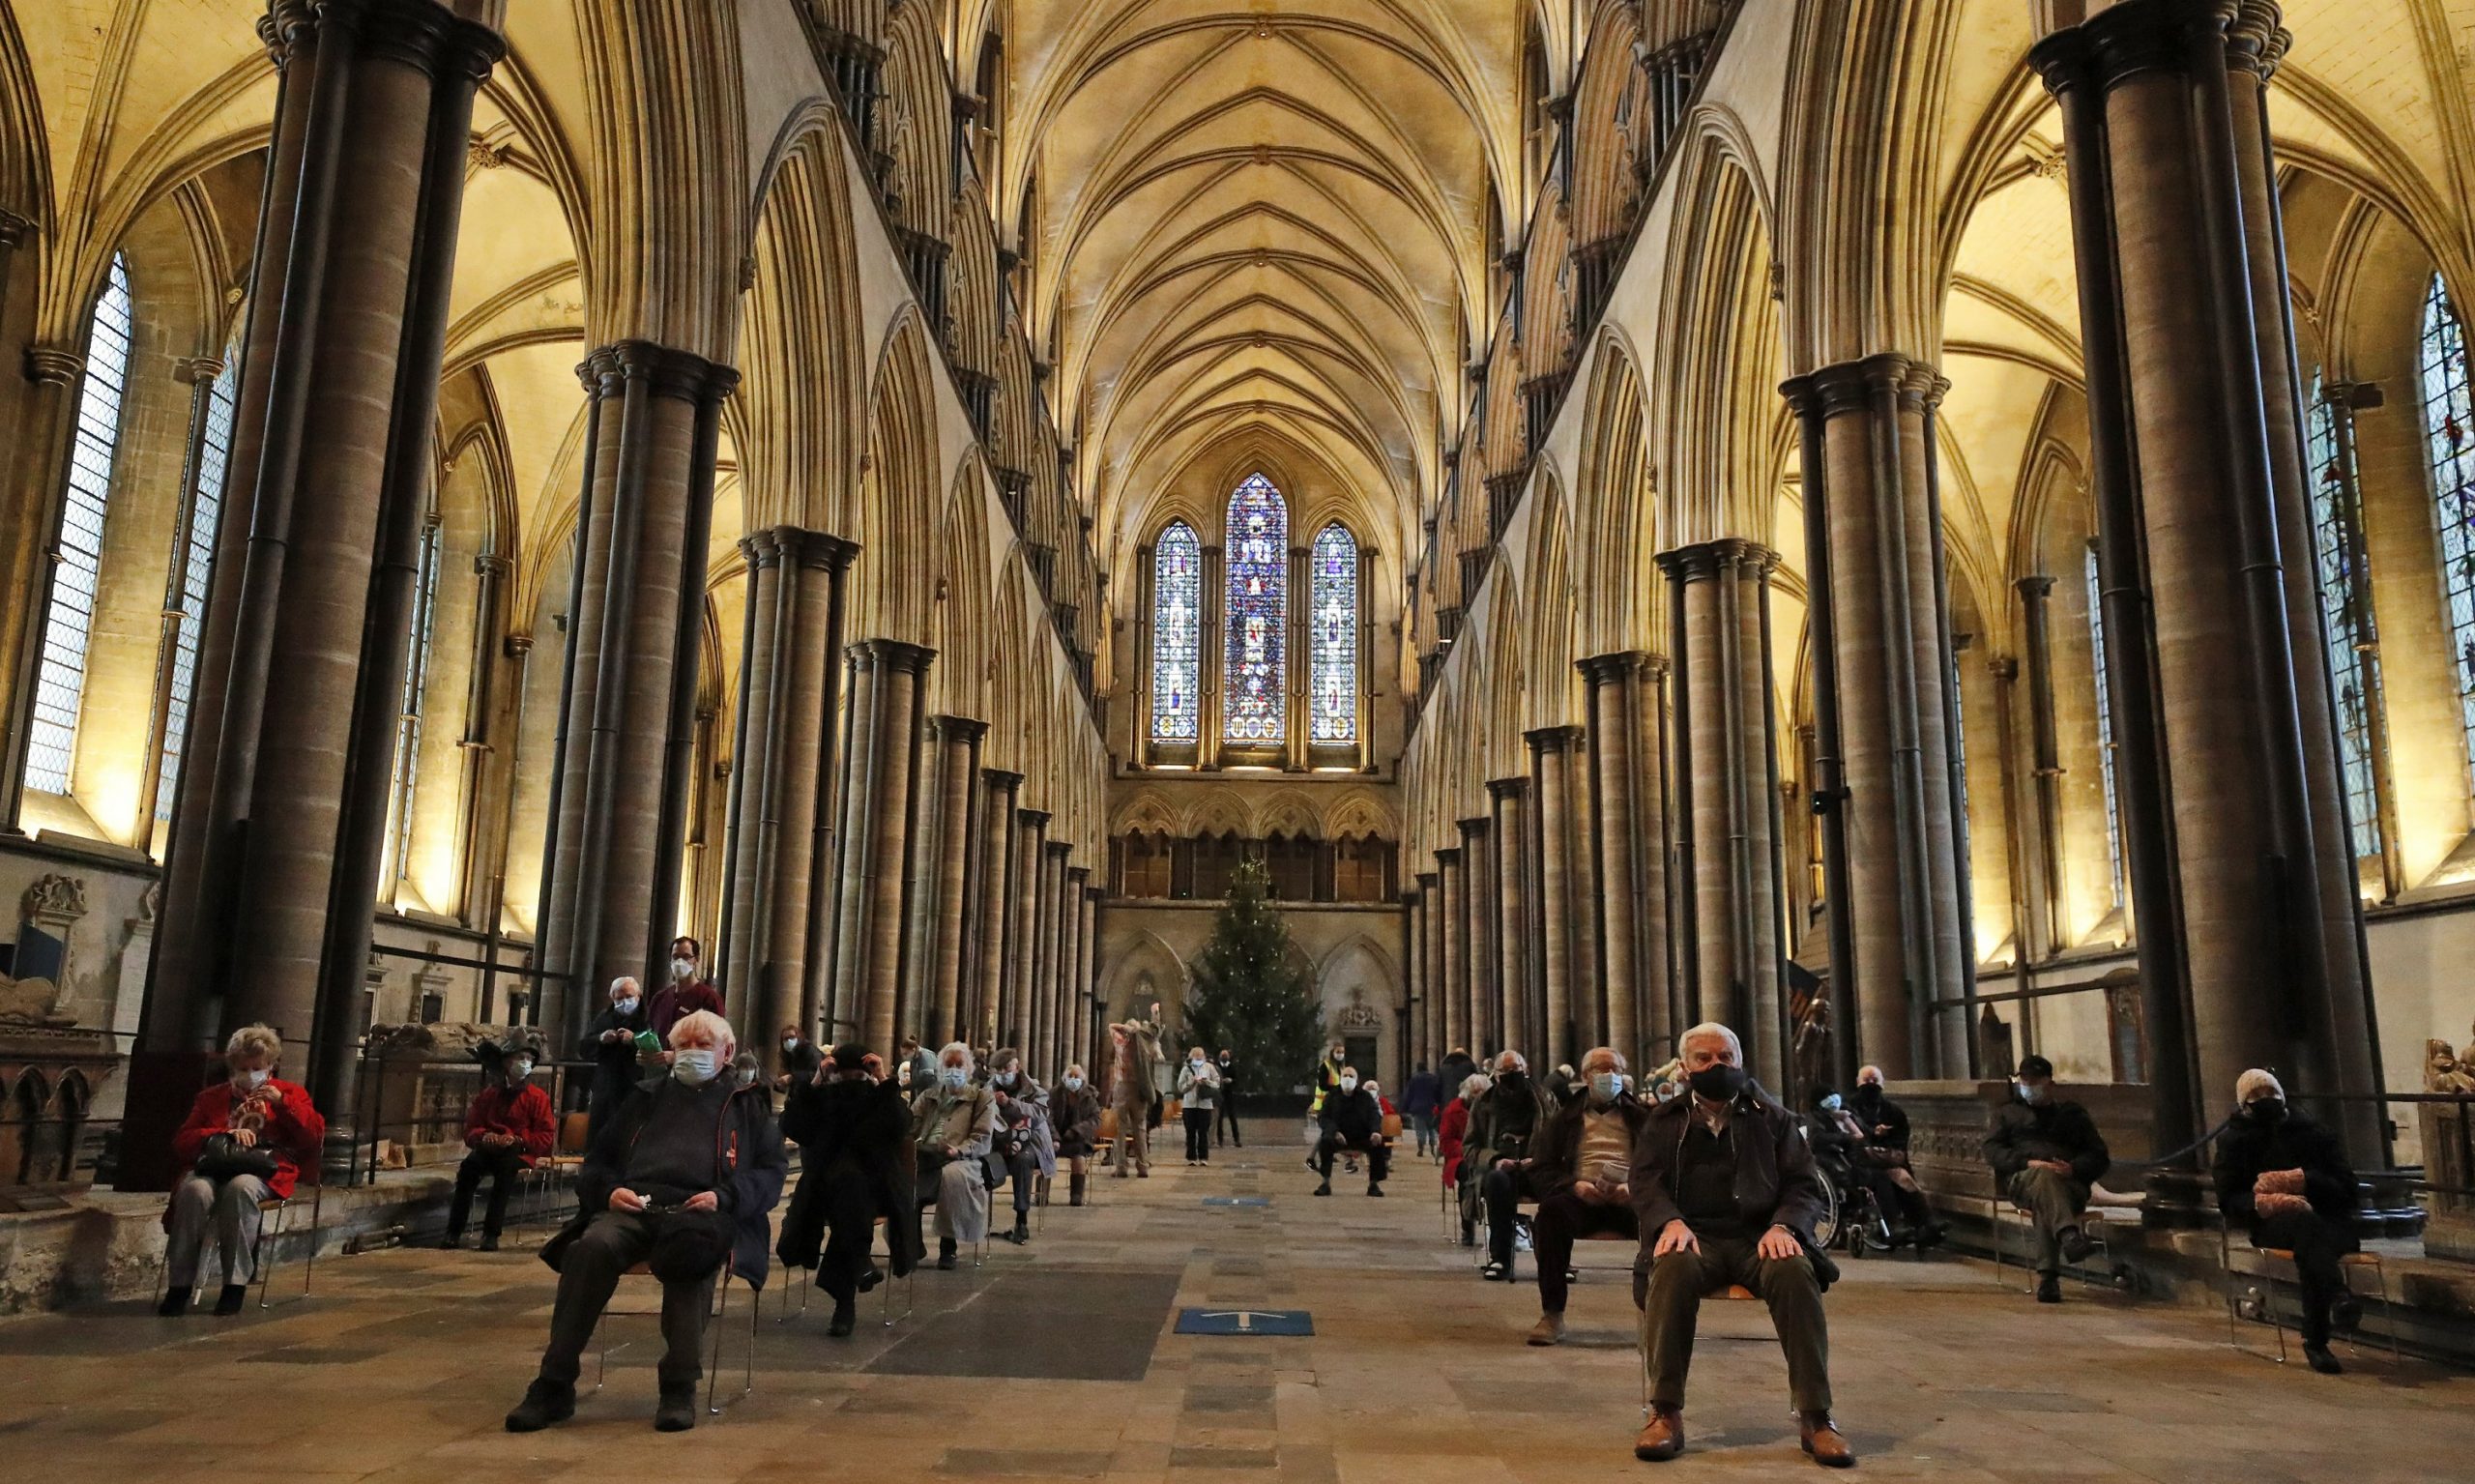 Organists perform soundtracks for crackles in a medieval UK cathedral